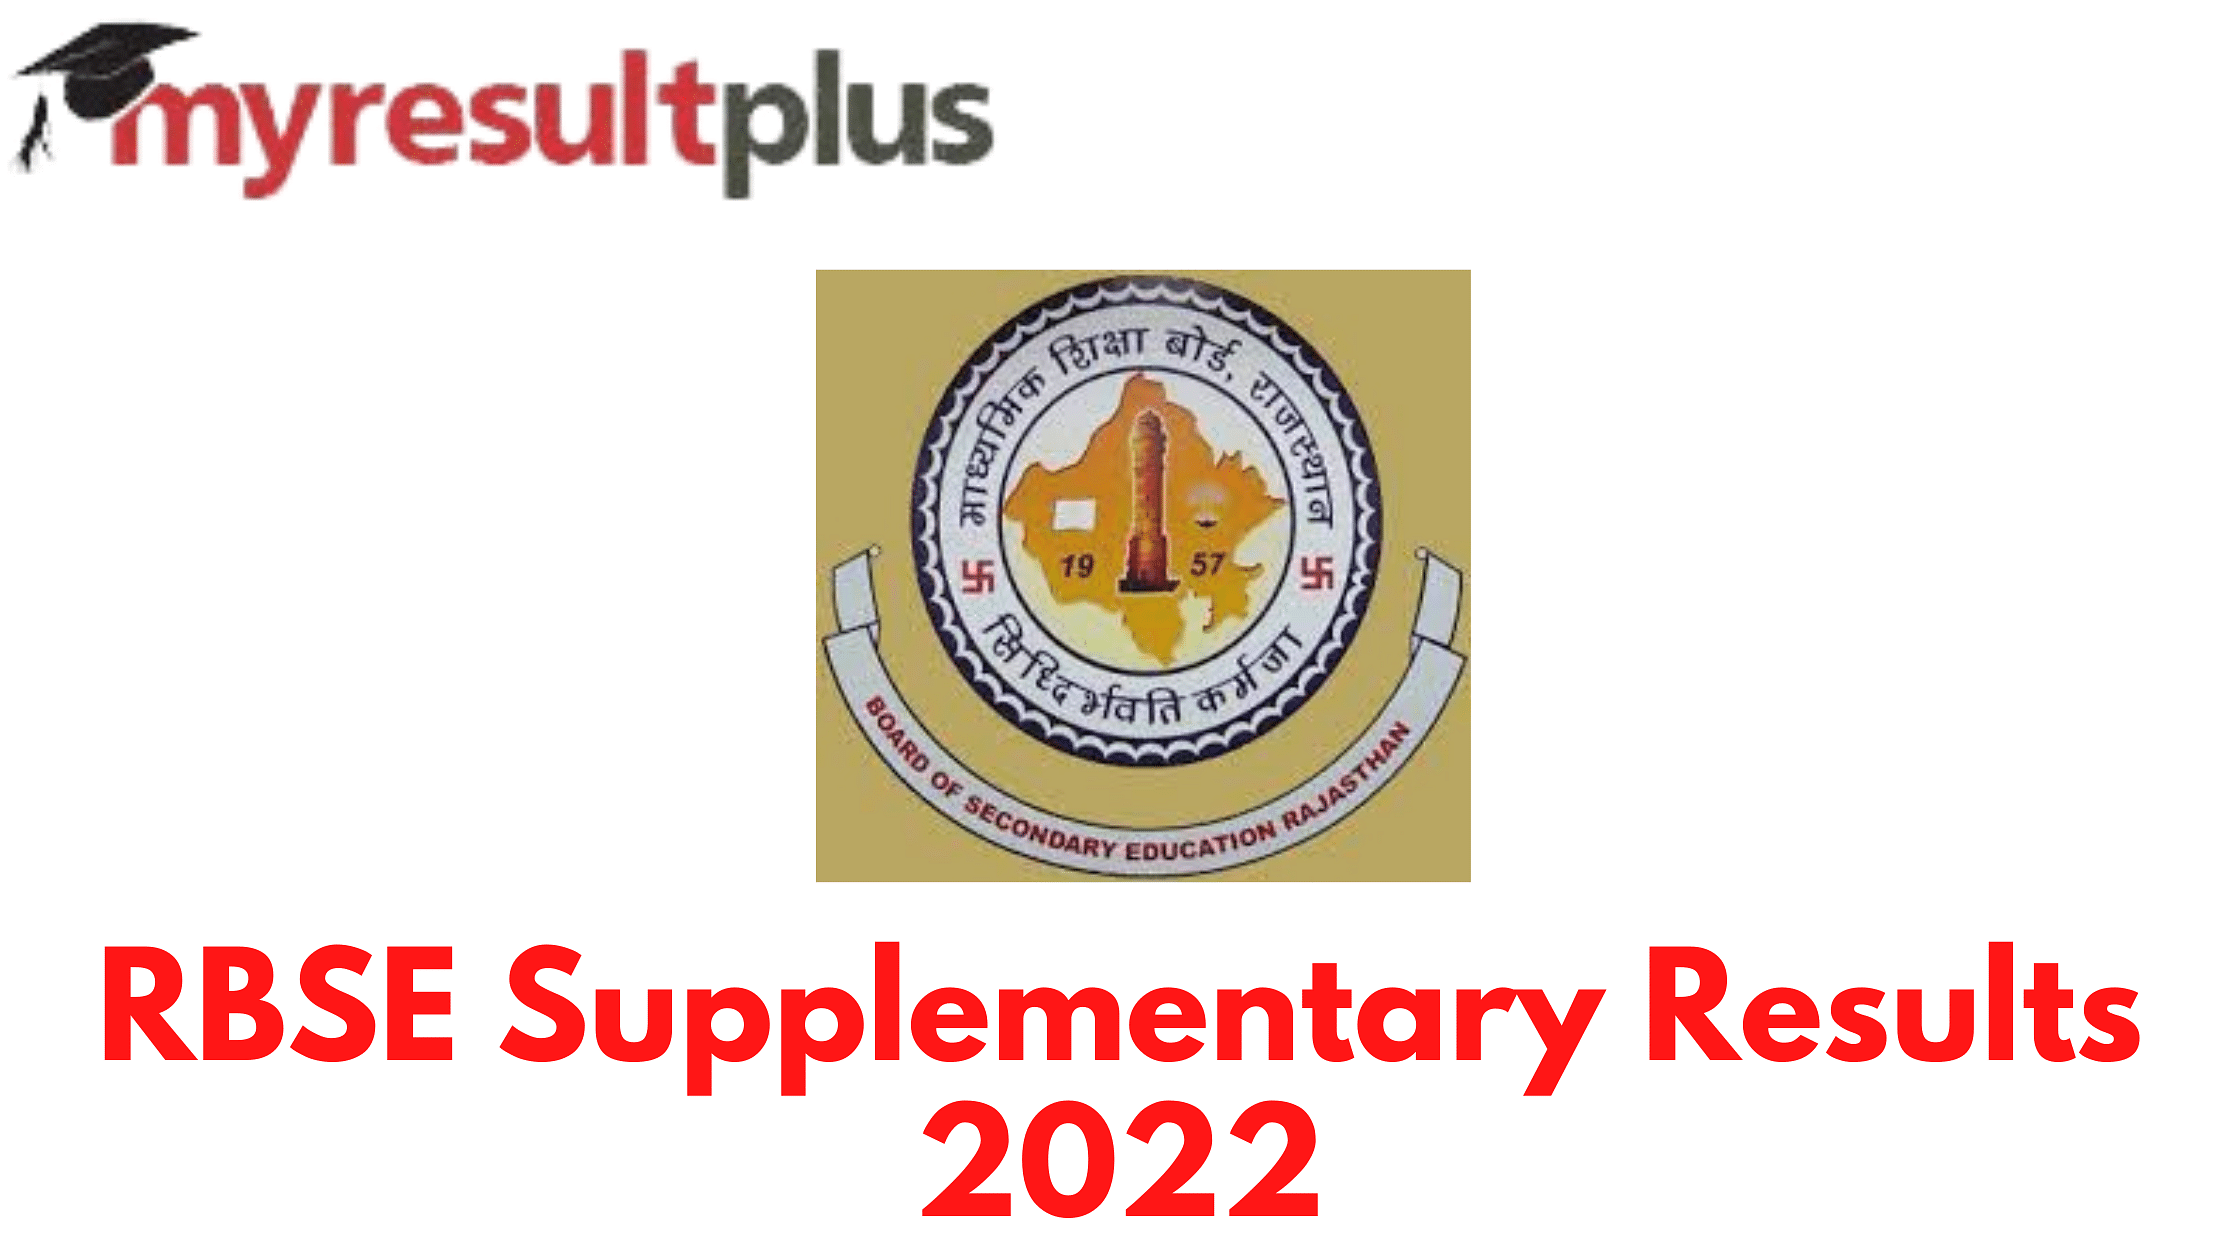 RBSE Supplementary Result 2022 Declared, Know How to Check Here